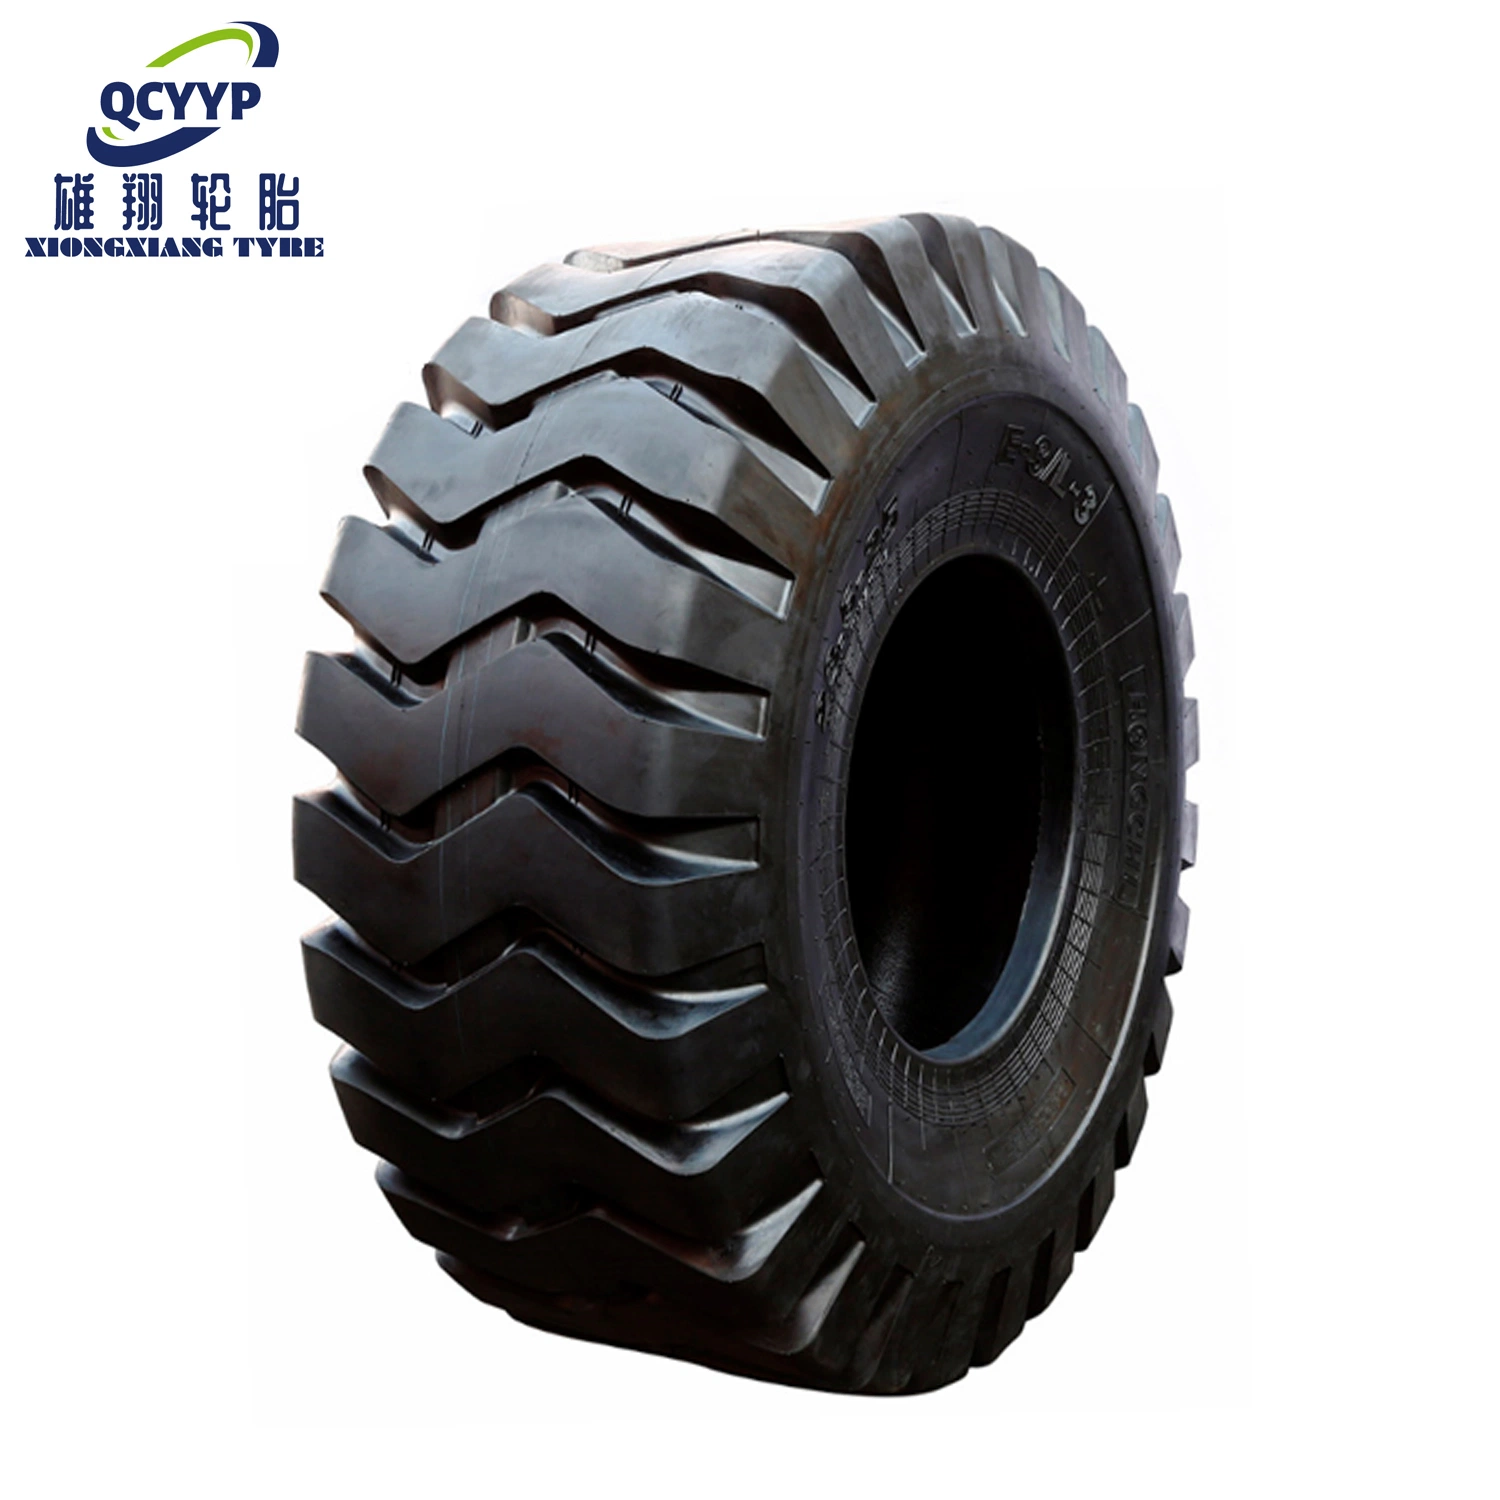 off-The-Road Tyre E3/L3/L5 (17.5-25, 20.5-25, 23.5-25, 26.5-25, 29.5-25) for Dumpers Grader Tyre of OTR Tire Industrial Tyre Solid Tyre OTR Tyre